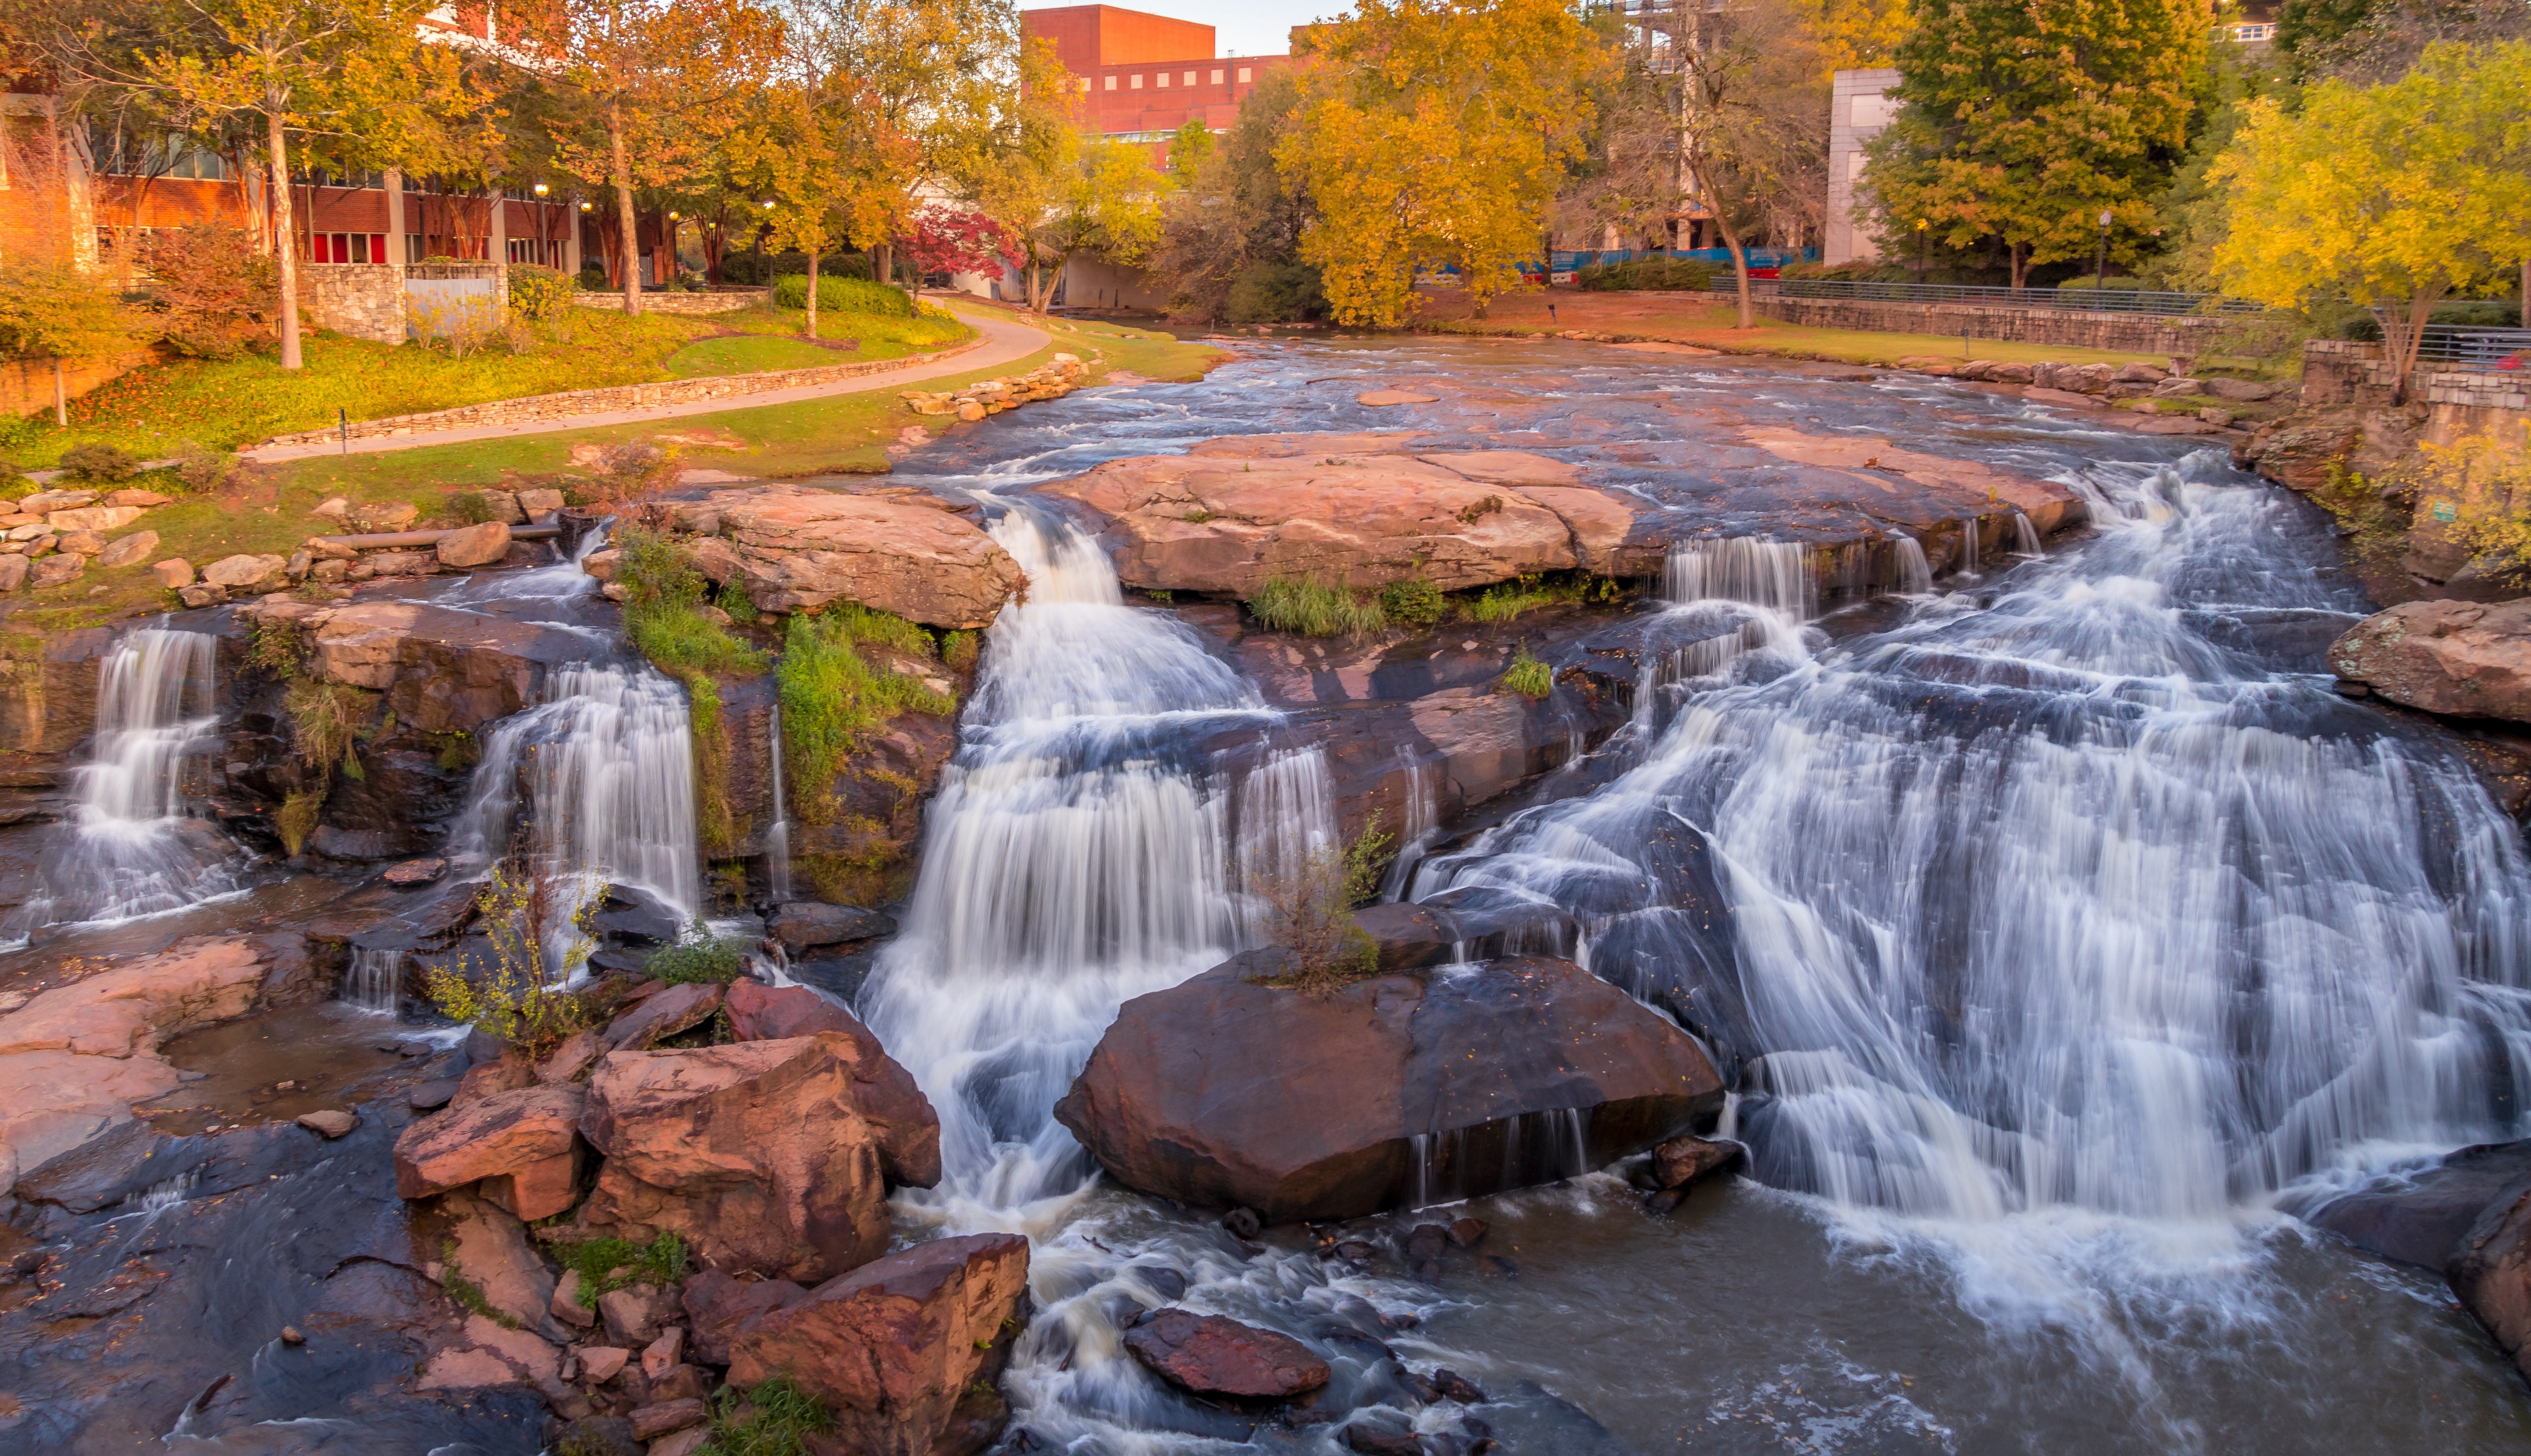 15 Steps to Consider When Moving to Greenville, SC